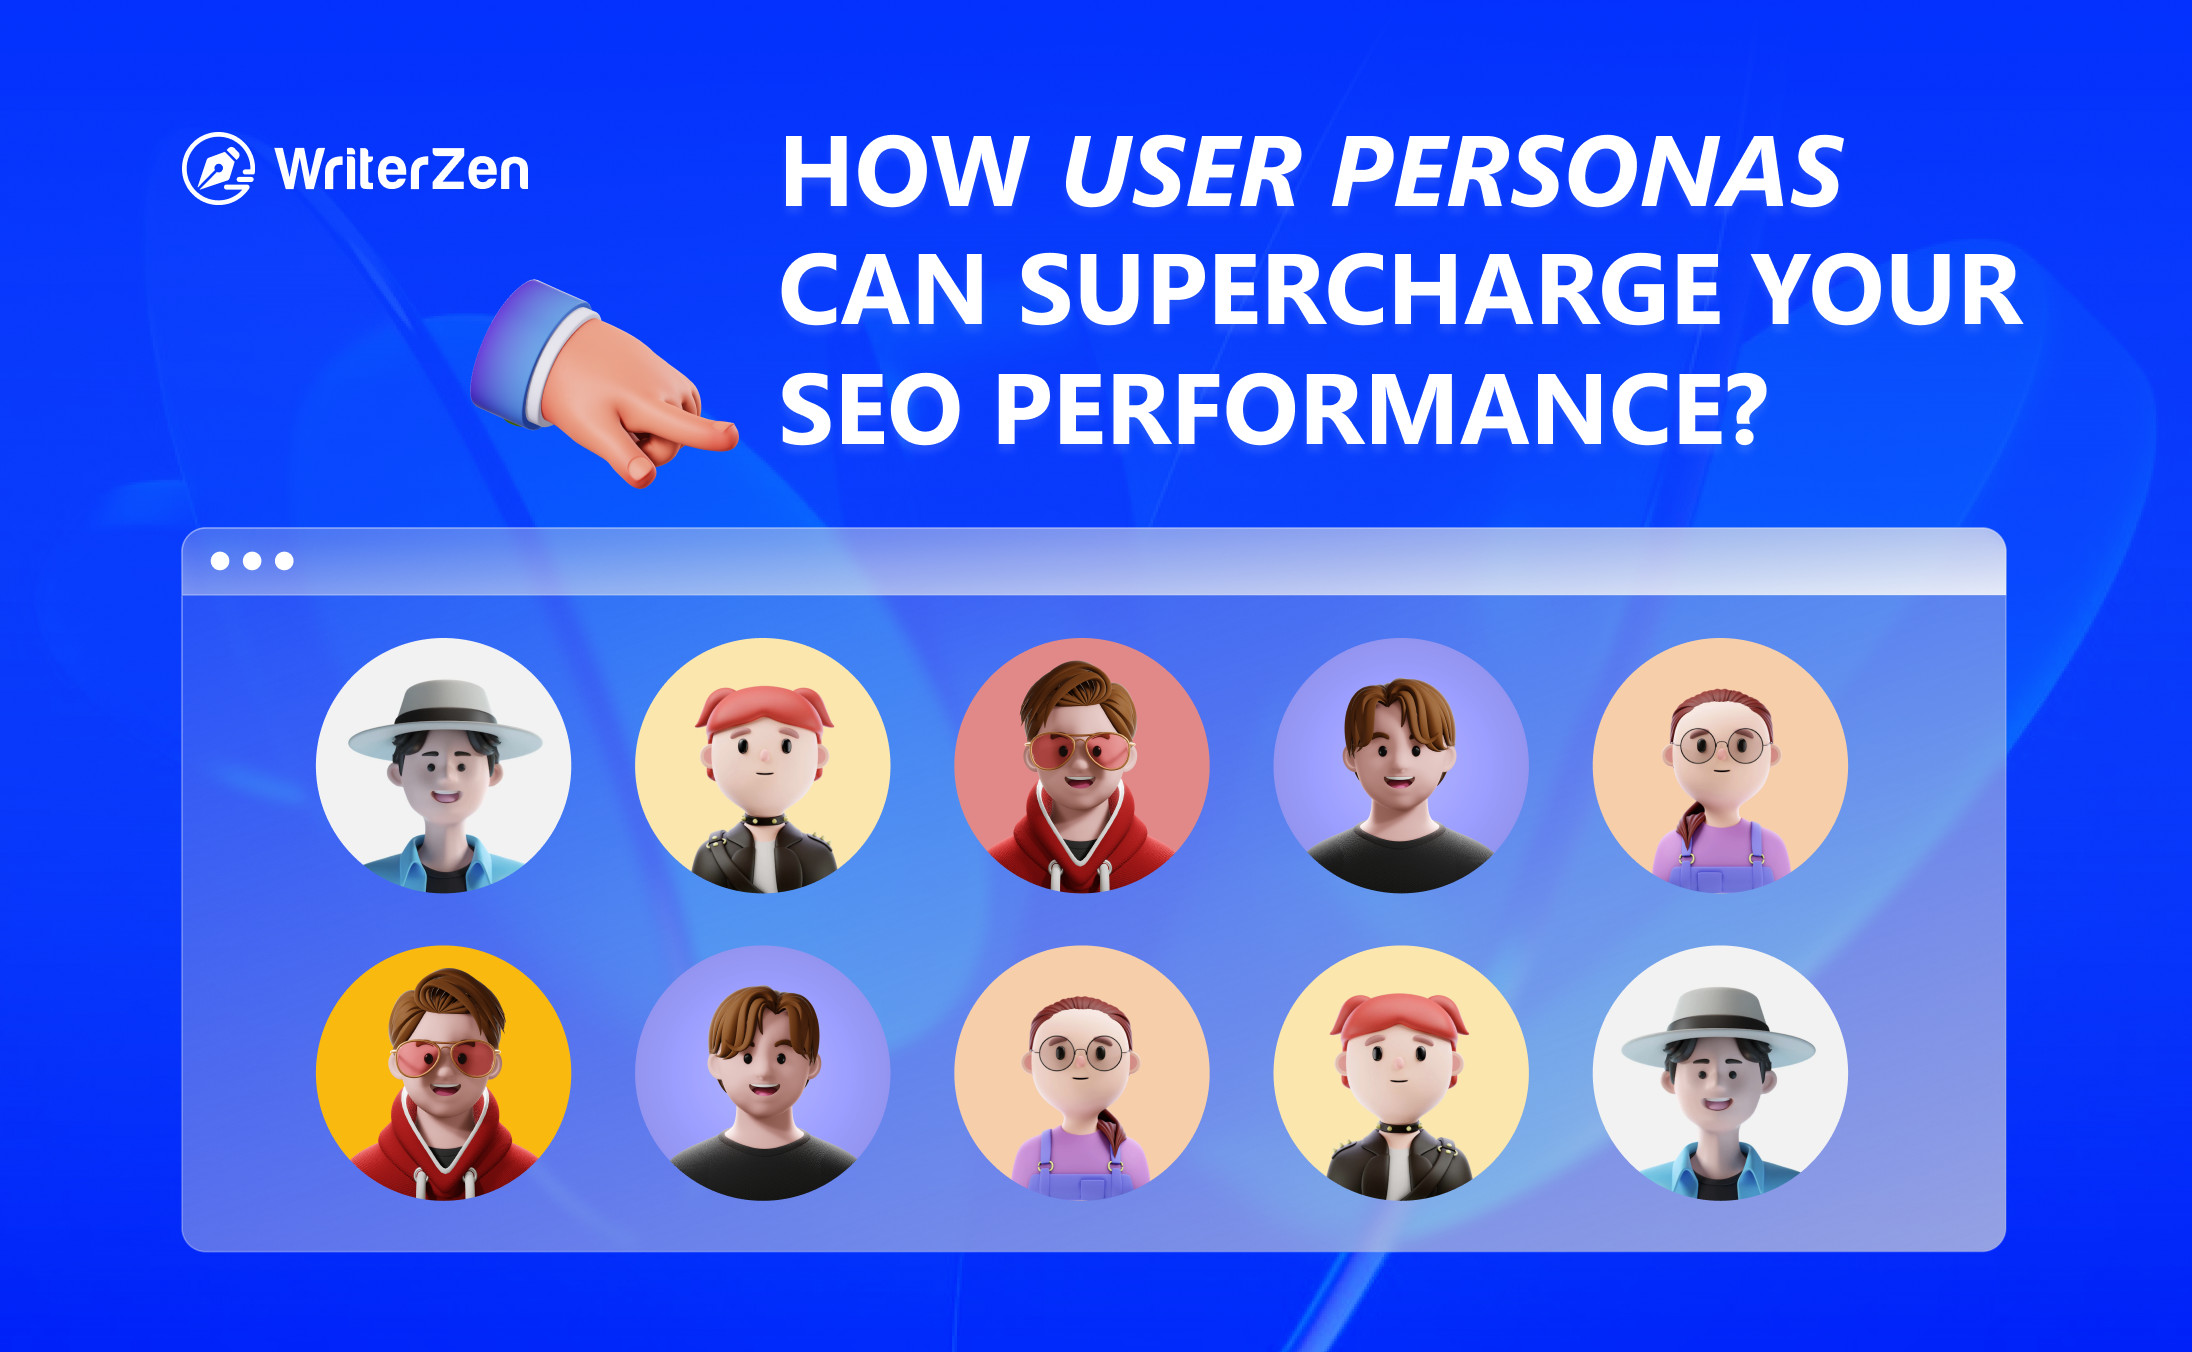 How User Personas Can Supercharge Your SEO Performance